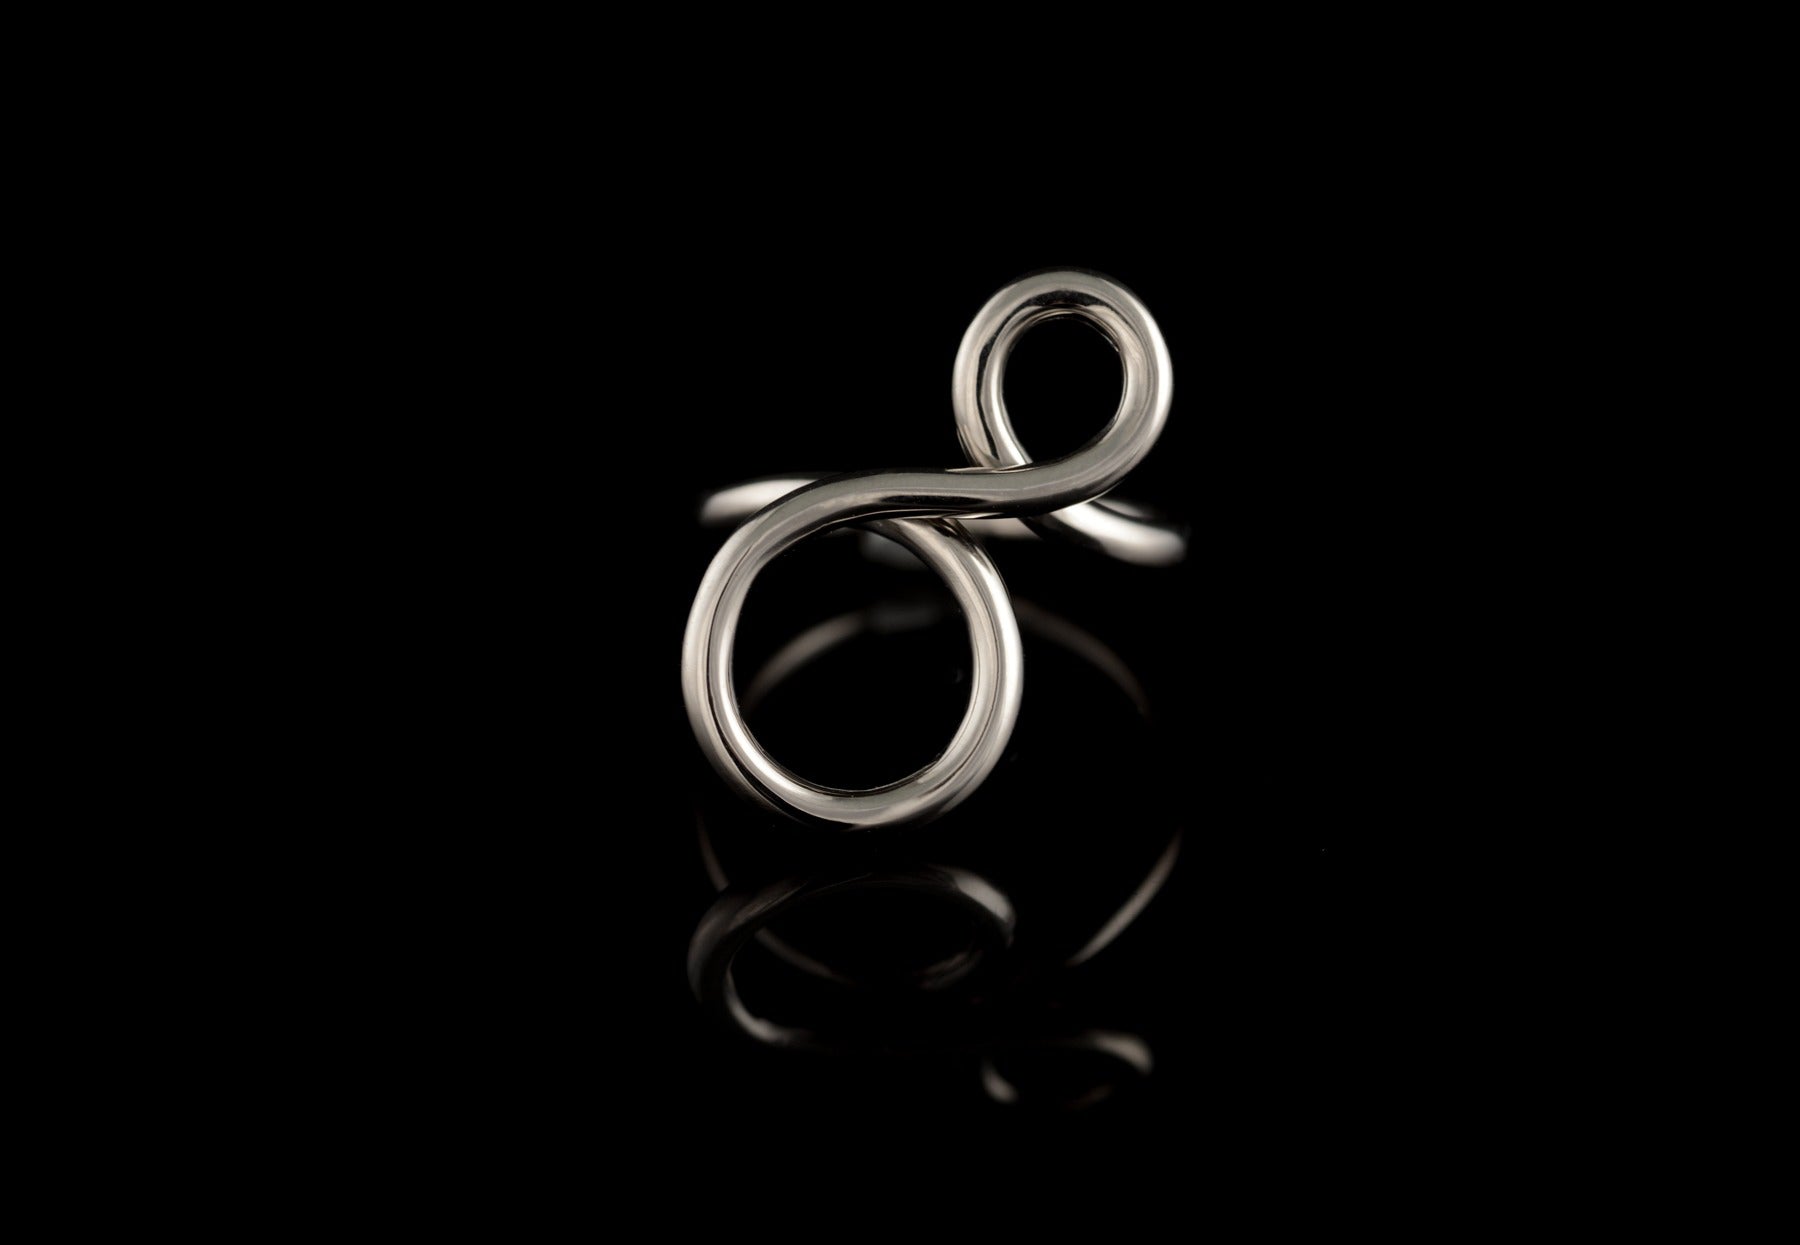 Asymmetric 18 carat white gold wire figure-of-eight cocktail ring